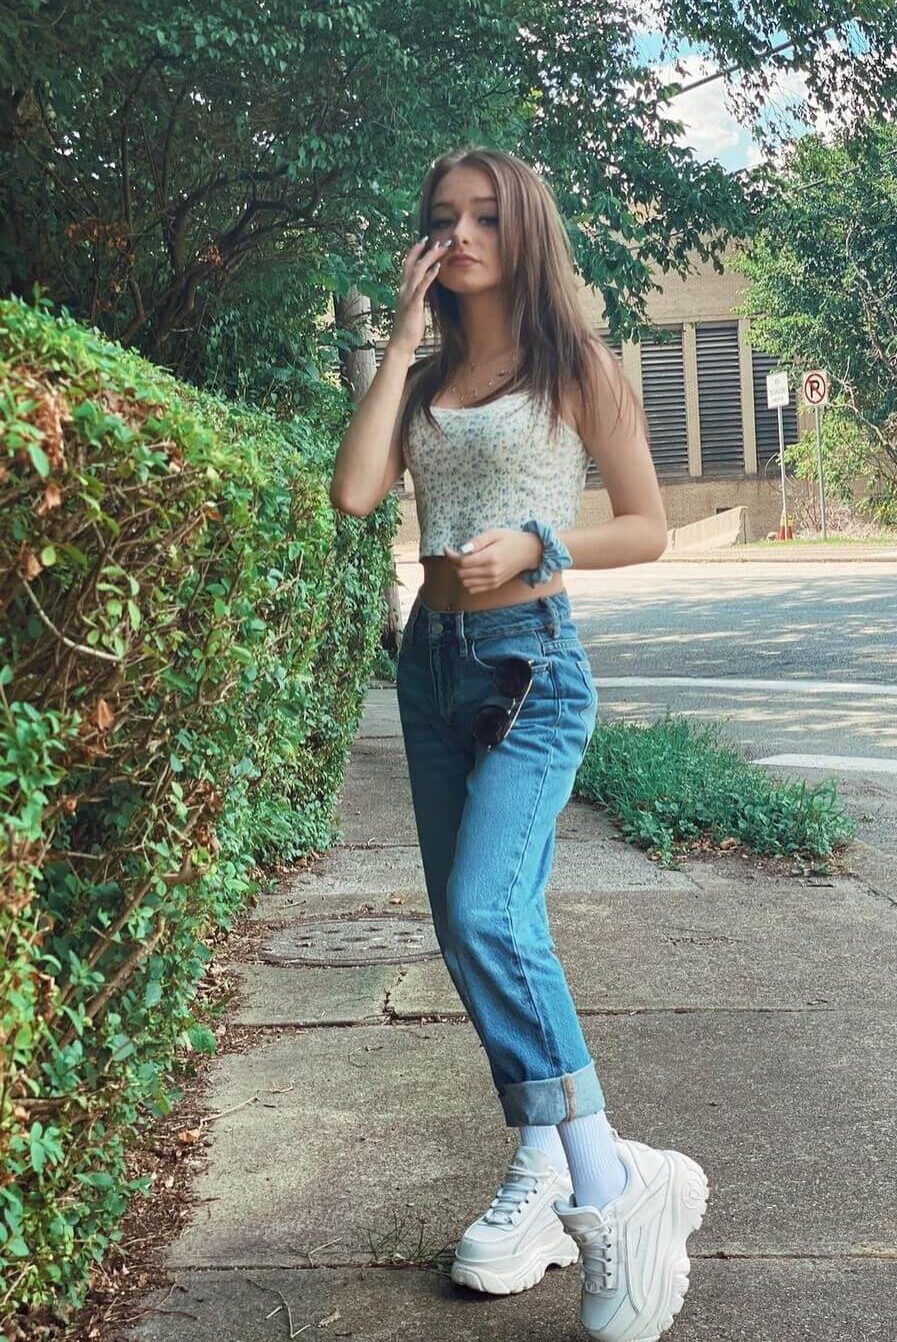 Zoe Laverne In White Crop Top With Denim Jeans